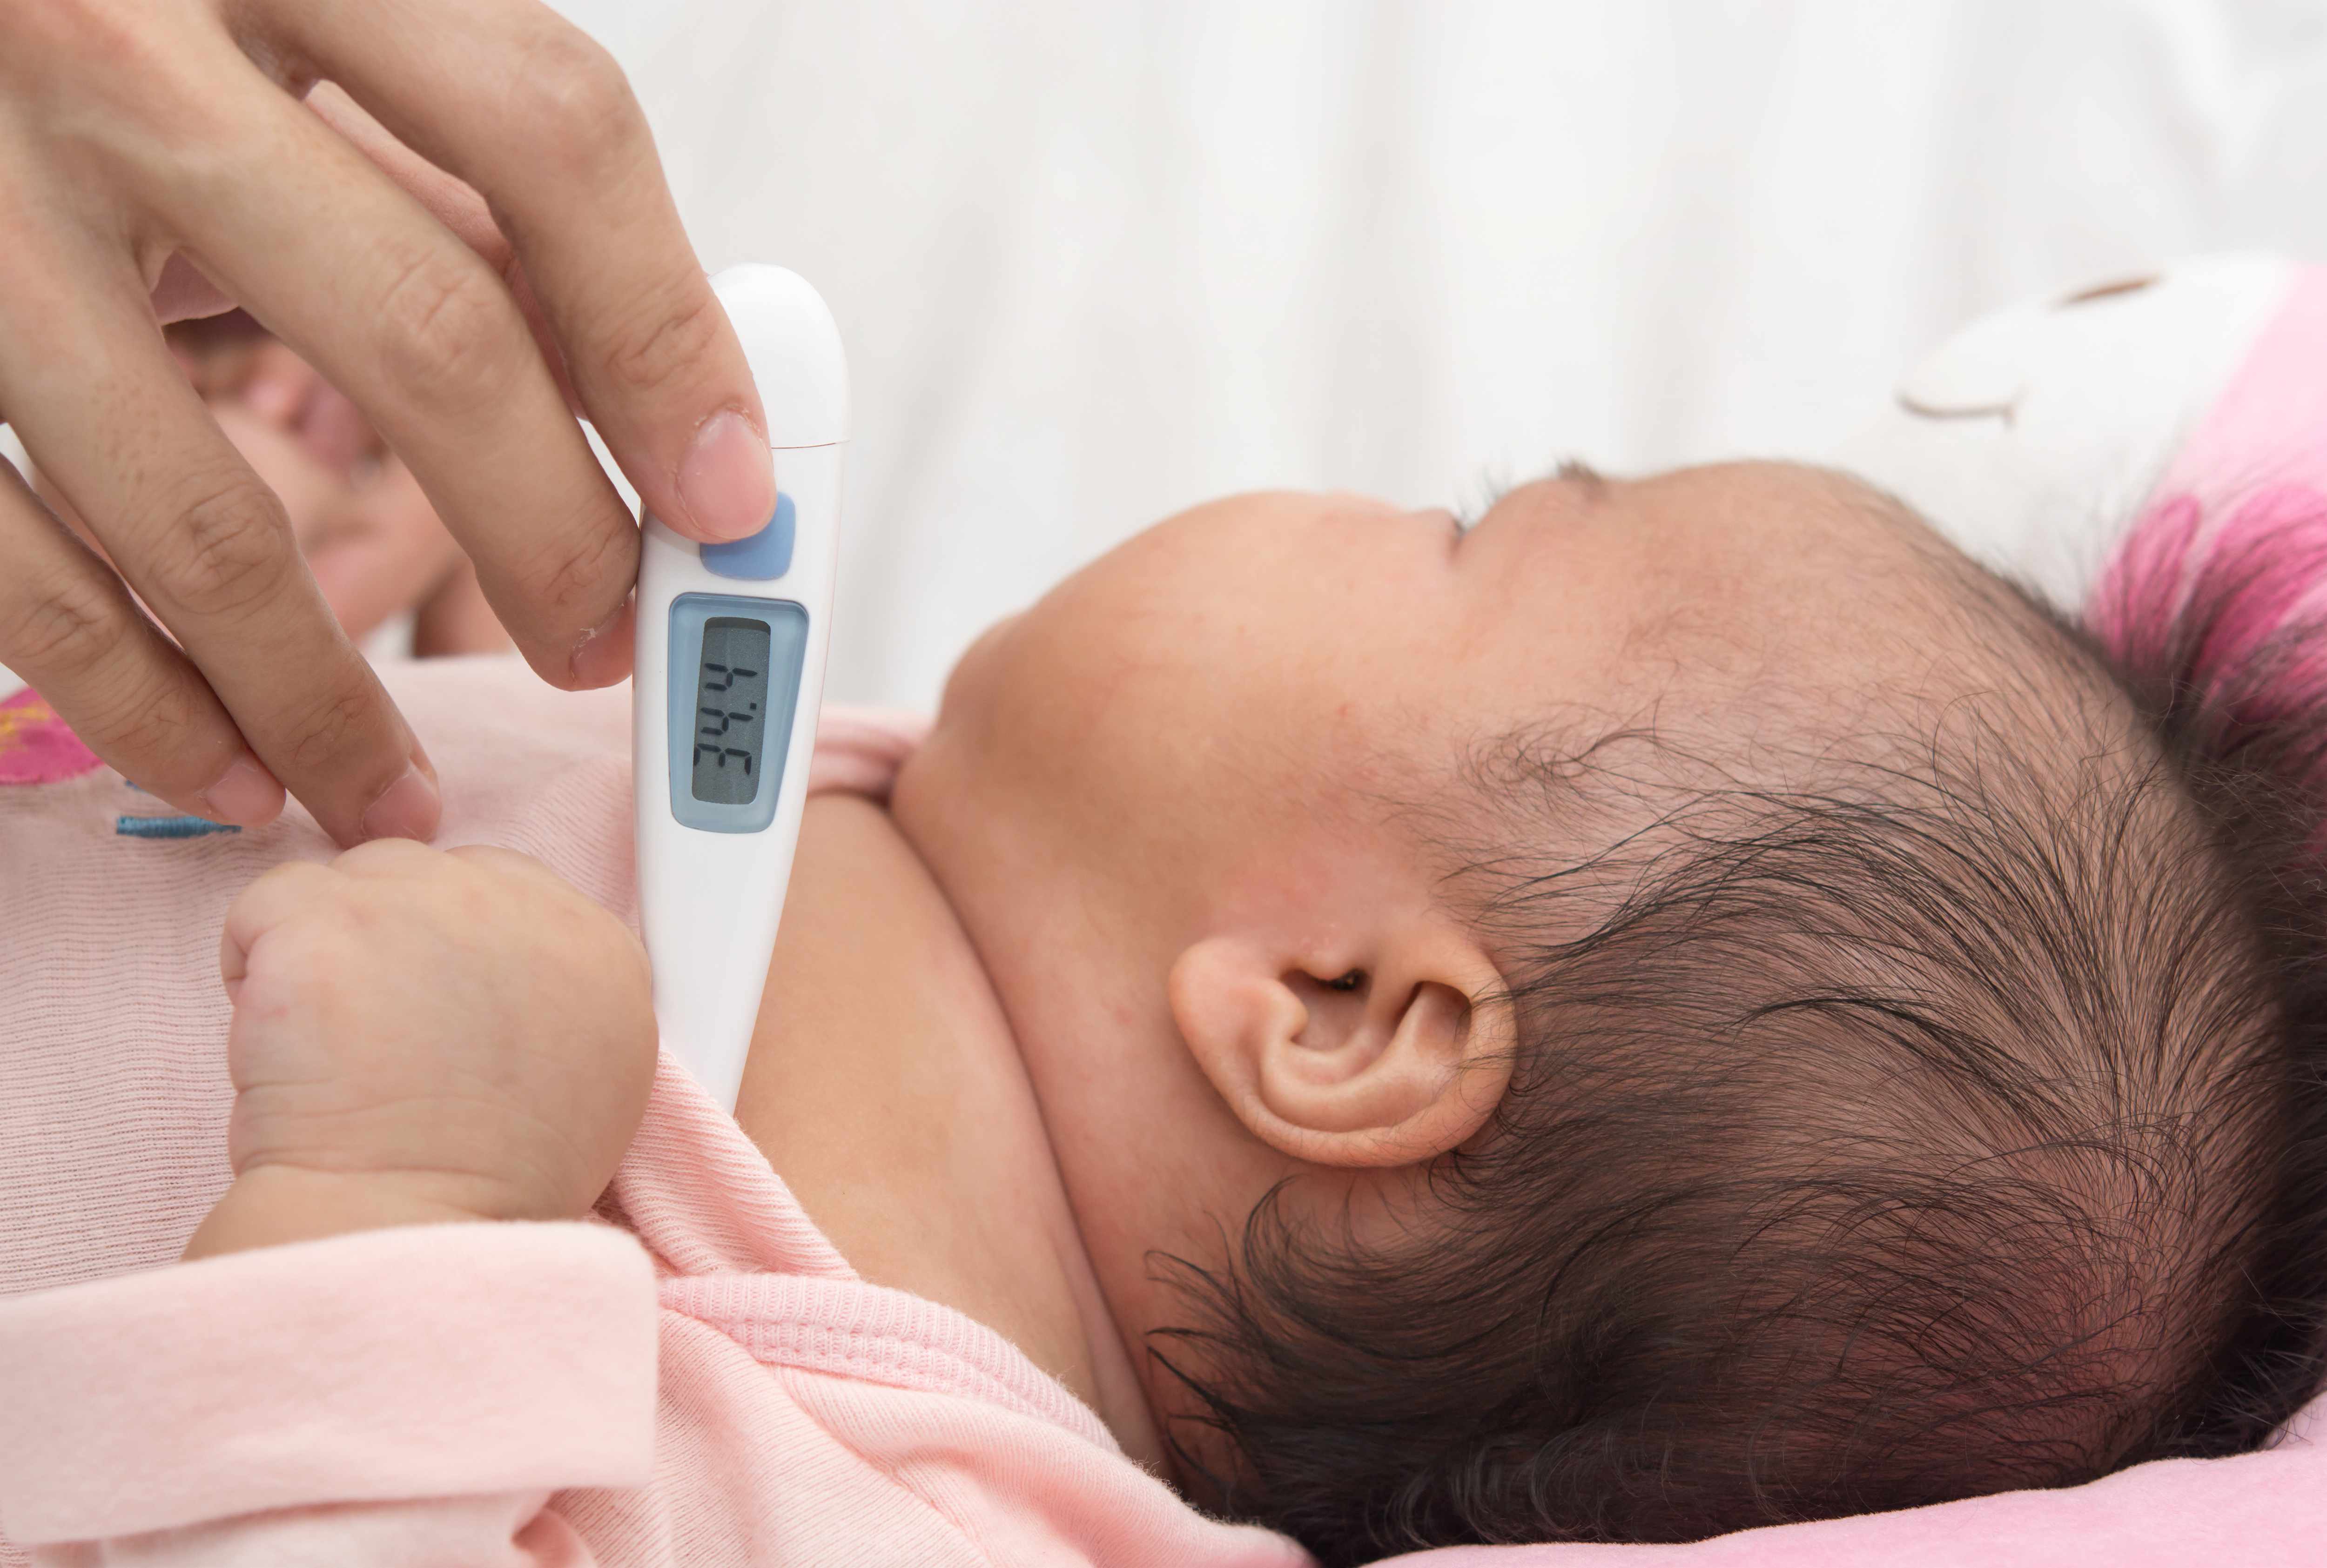 an infant having his or her temperature taken with a digital thermometer under the arm